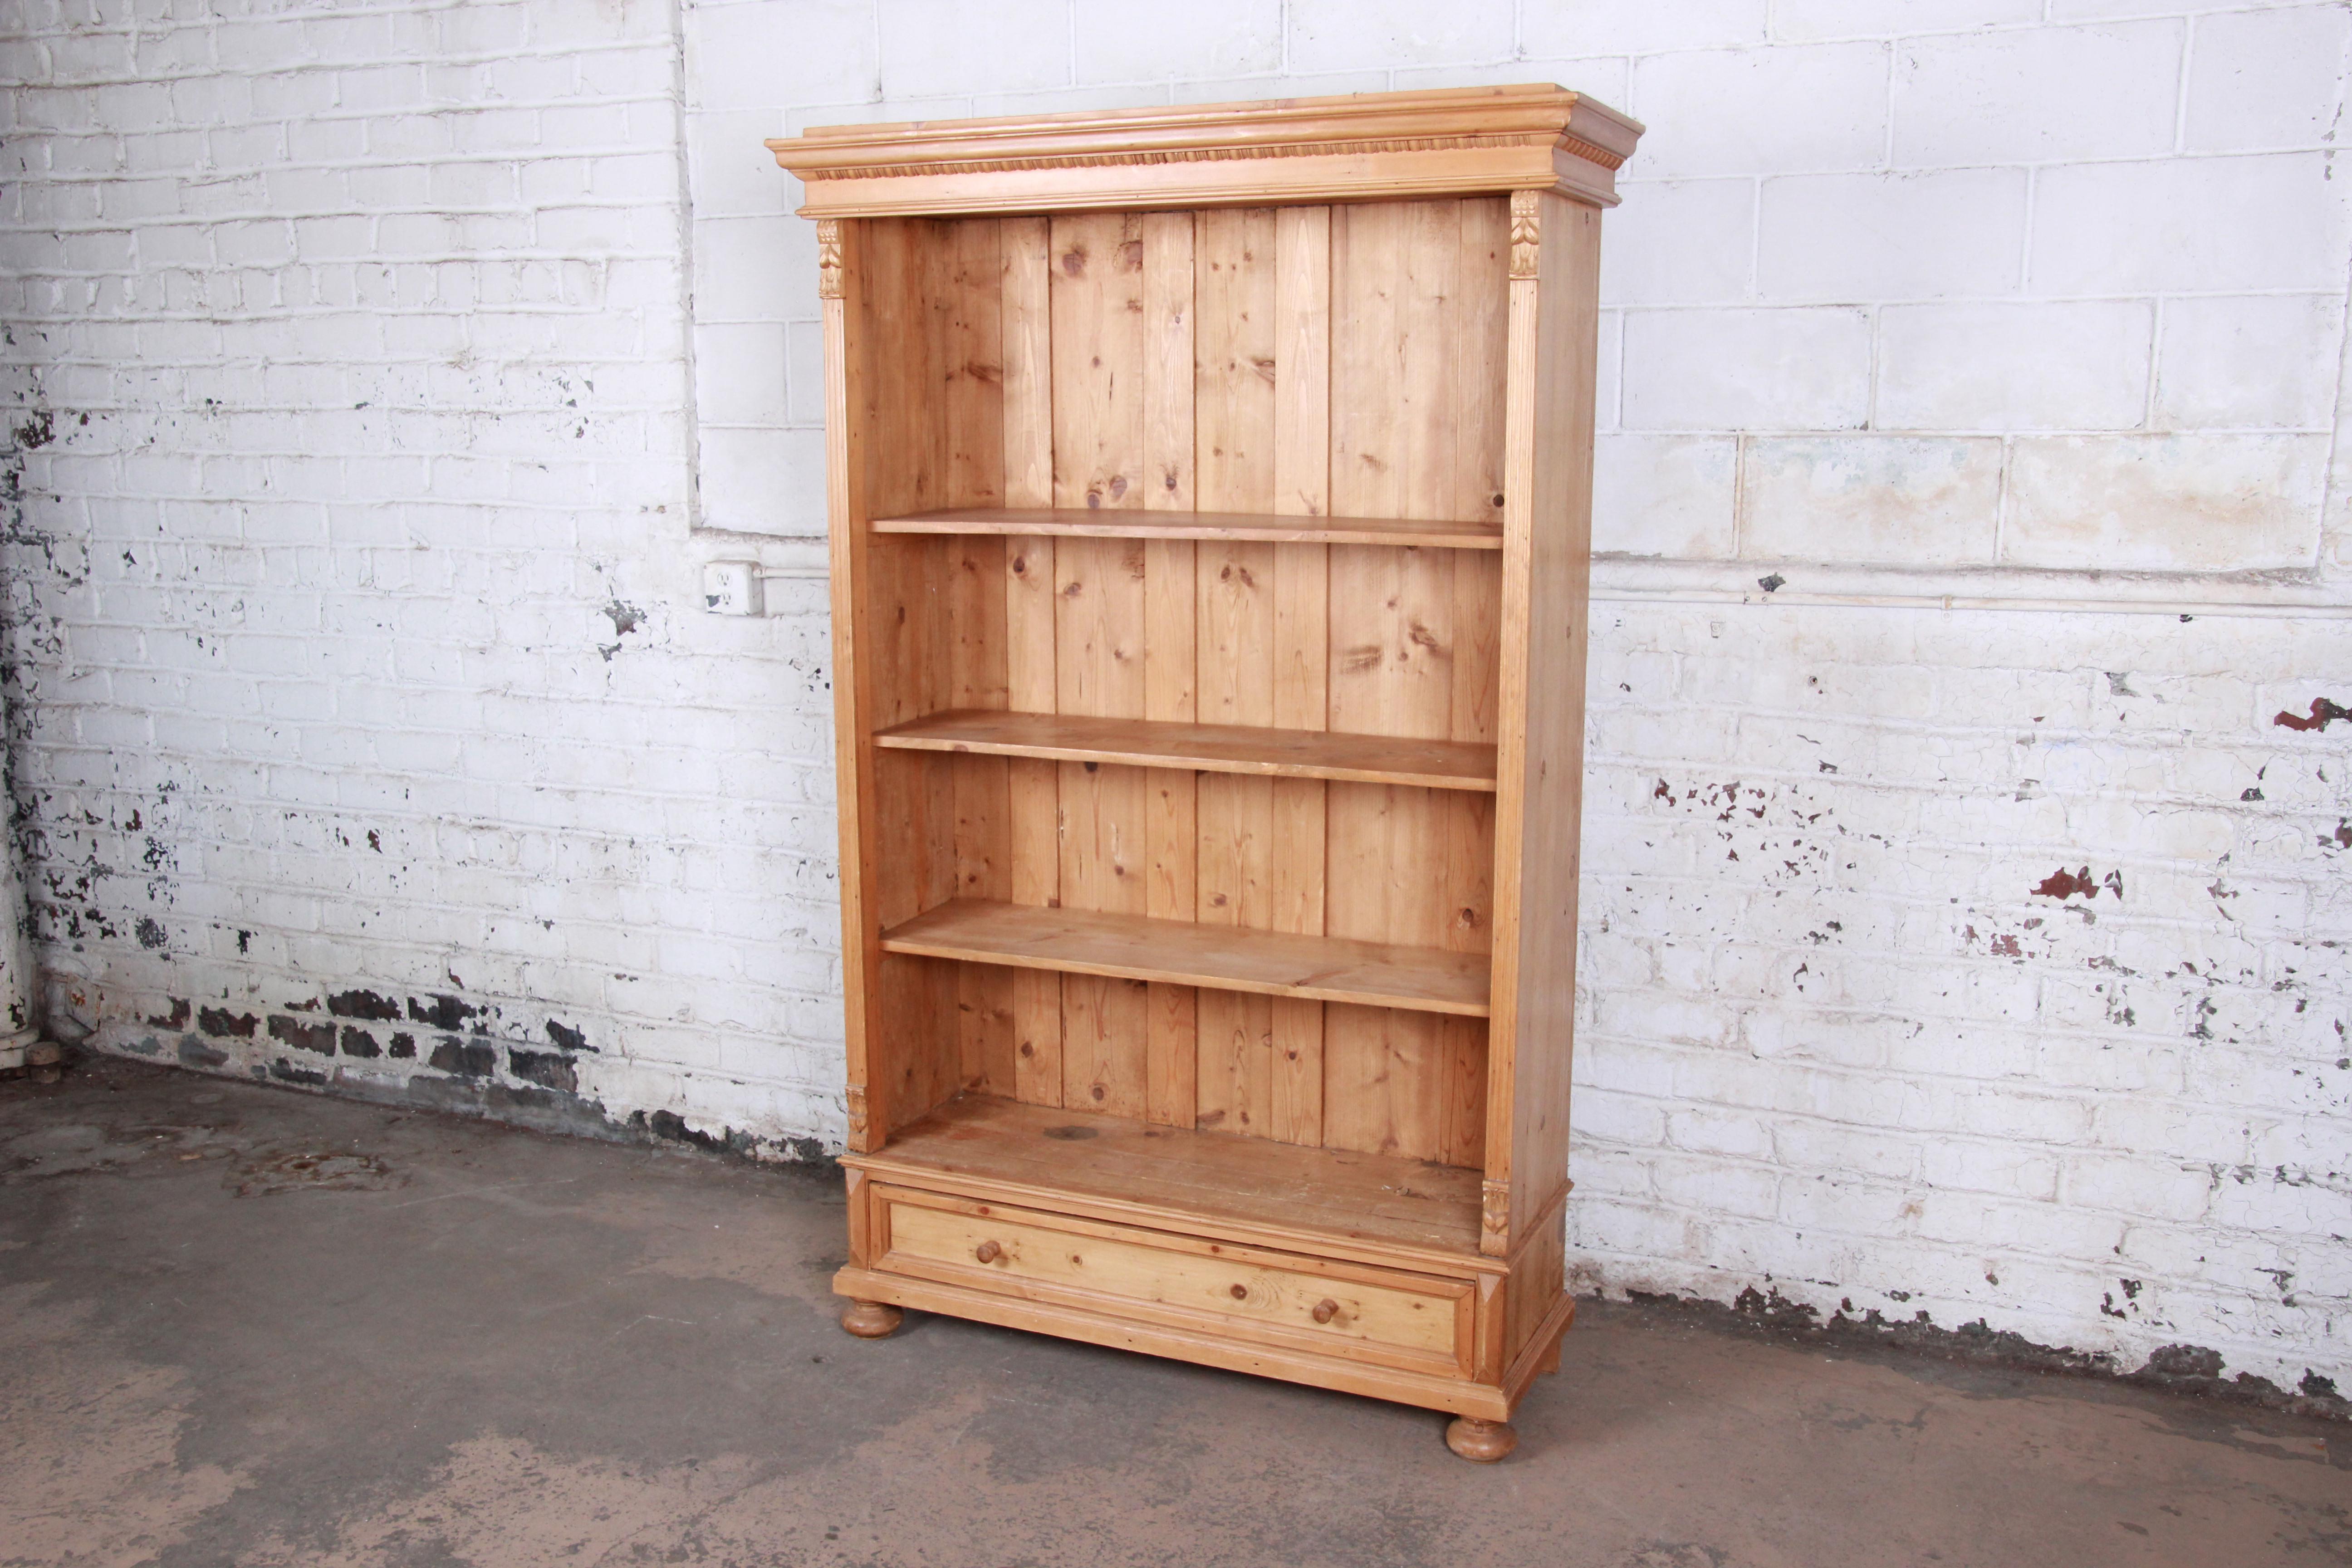 A gorgeous primitive solid pine bookcase. The bookcase features beautiful carved wood details and nice knotty pine wood grain. It offers ample room for storage and display, with three open shelves and a single dovetailed drawer below. The bookcase